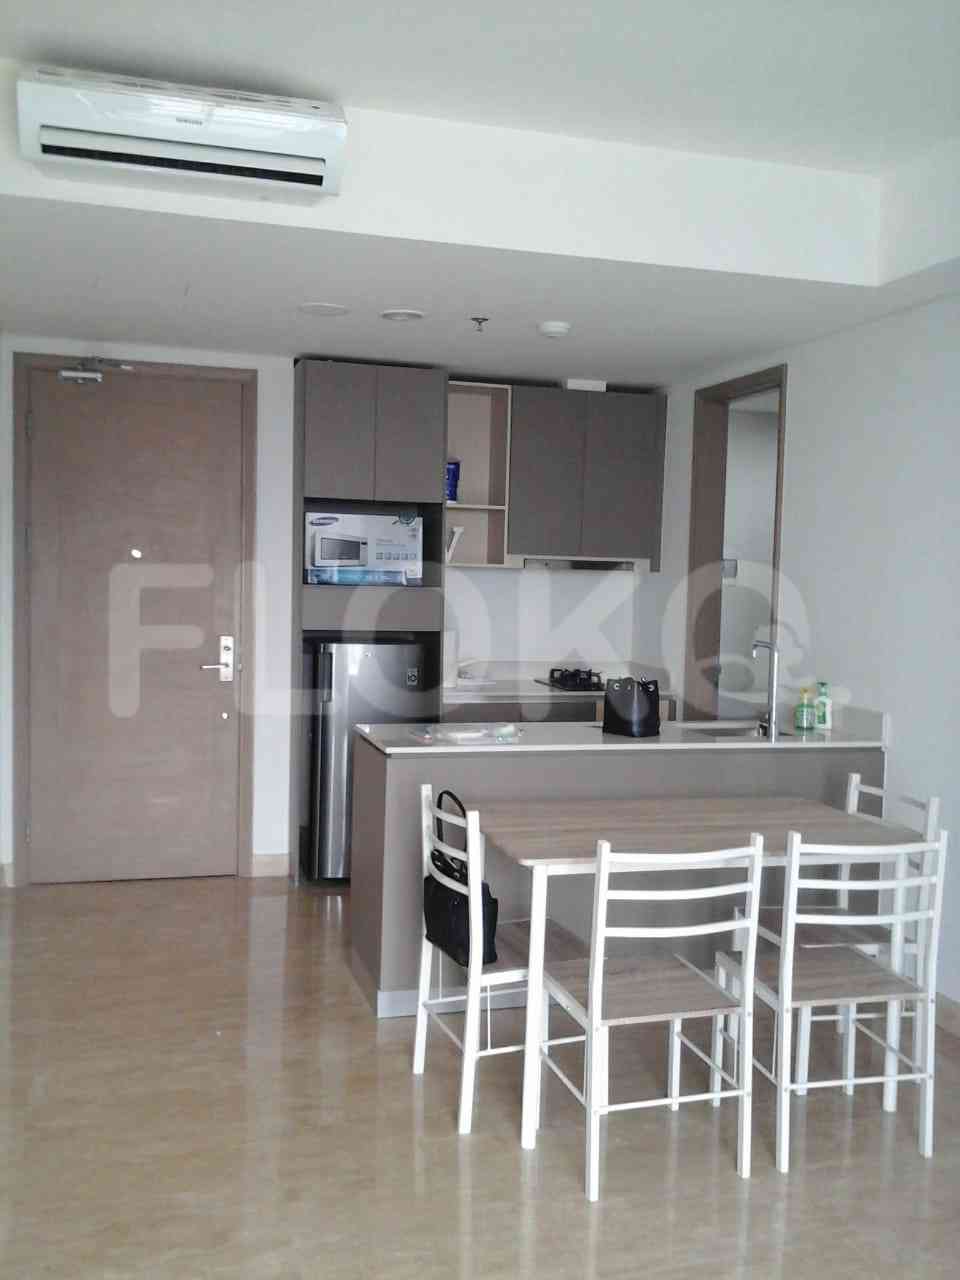 3 Bedroom on 9th Floor for Rent in Gold Coast Apartment - fka0a3 2